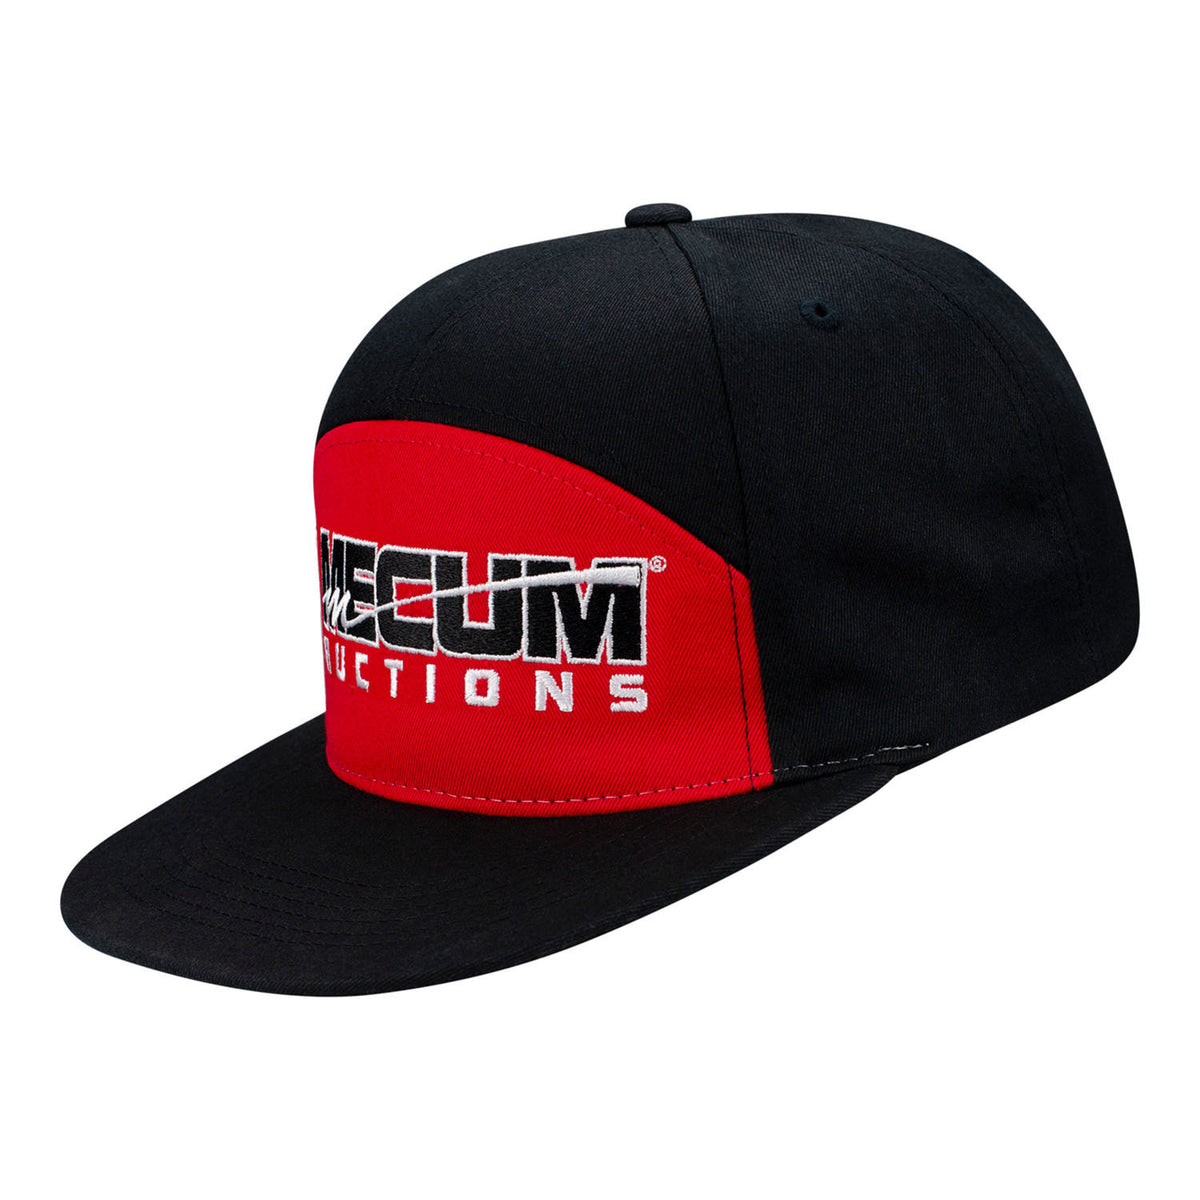 Primary Logo Red/Black Snapback - Front Left Side View